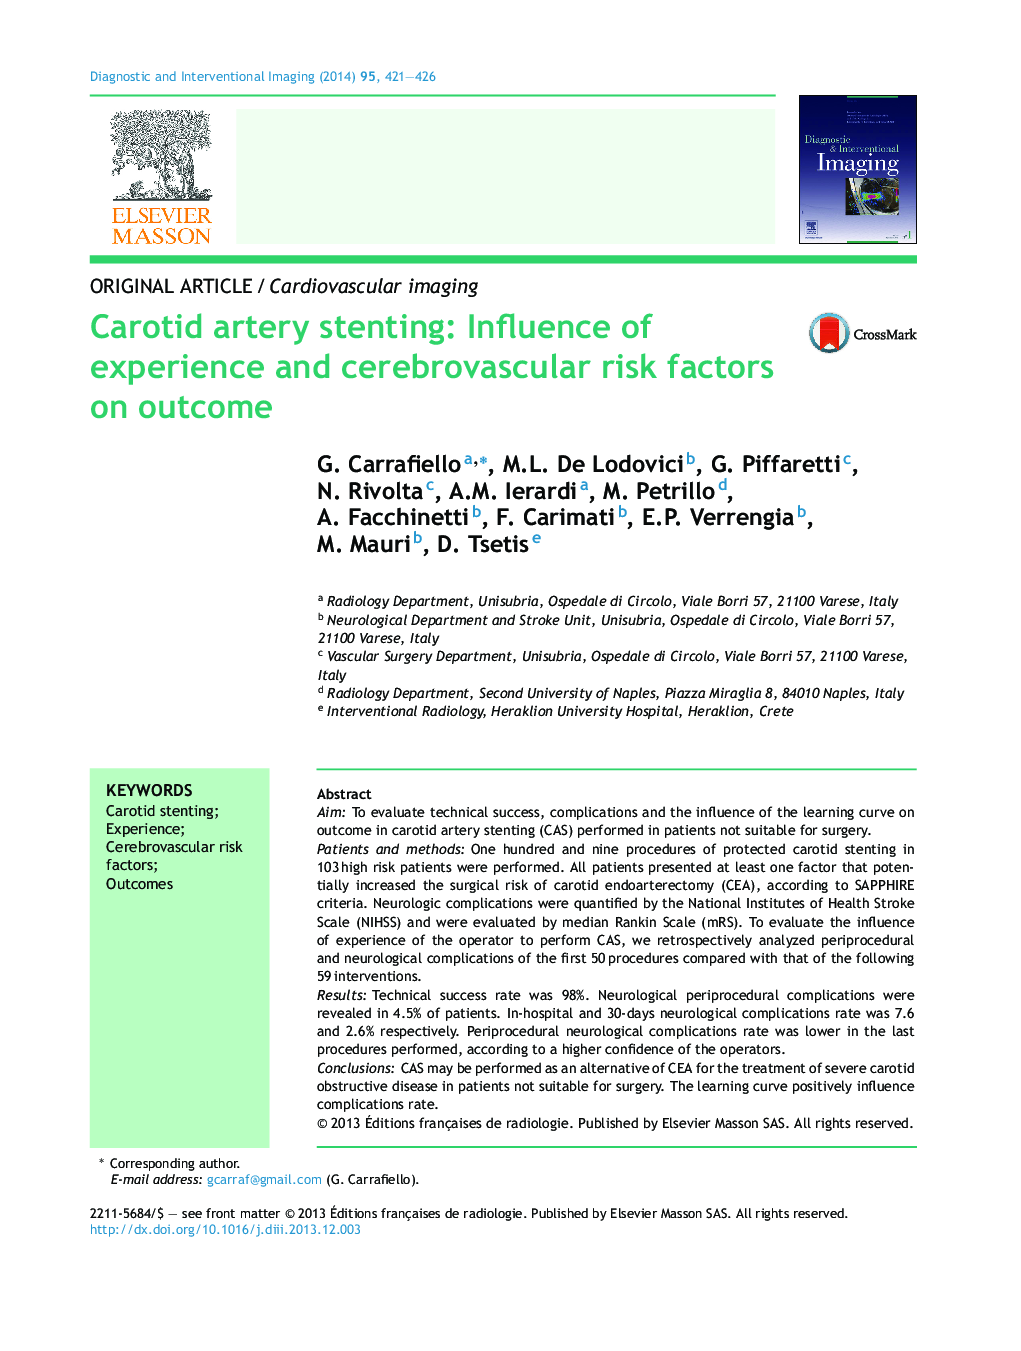 Carotid artery stenting: Influence of experience and cerebrovascular risk factors on outcome